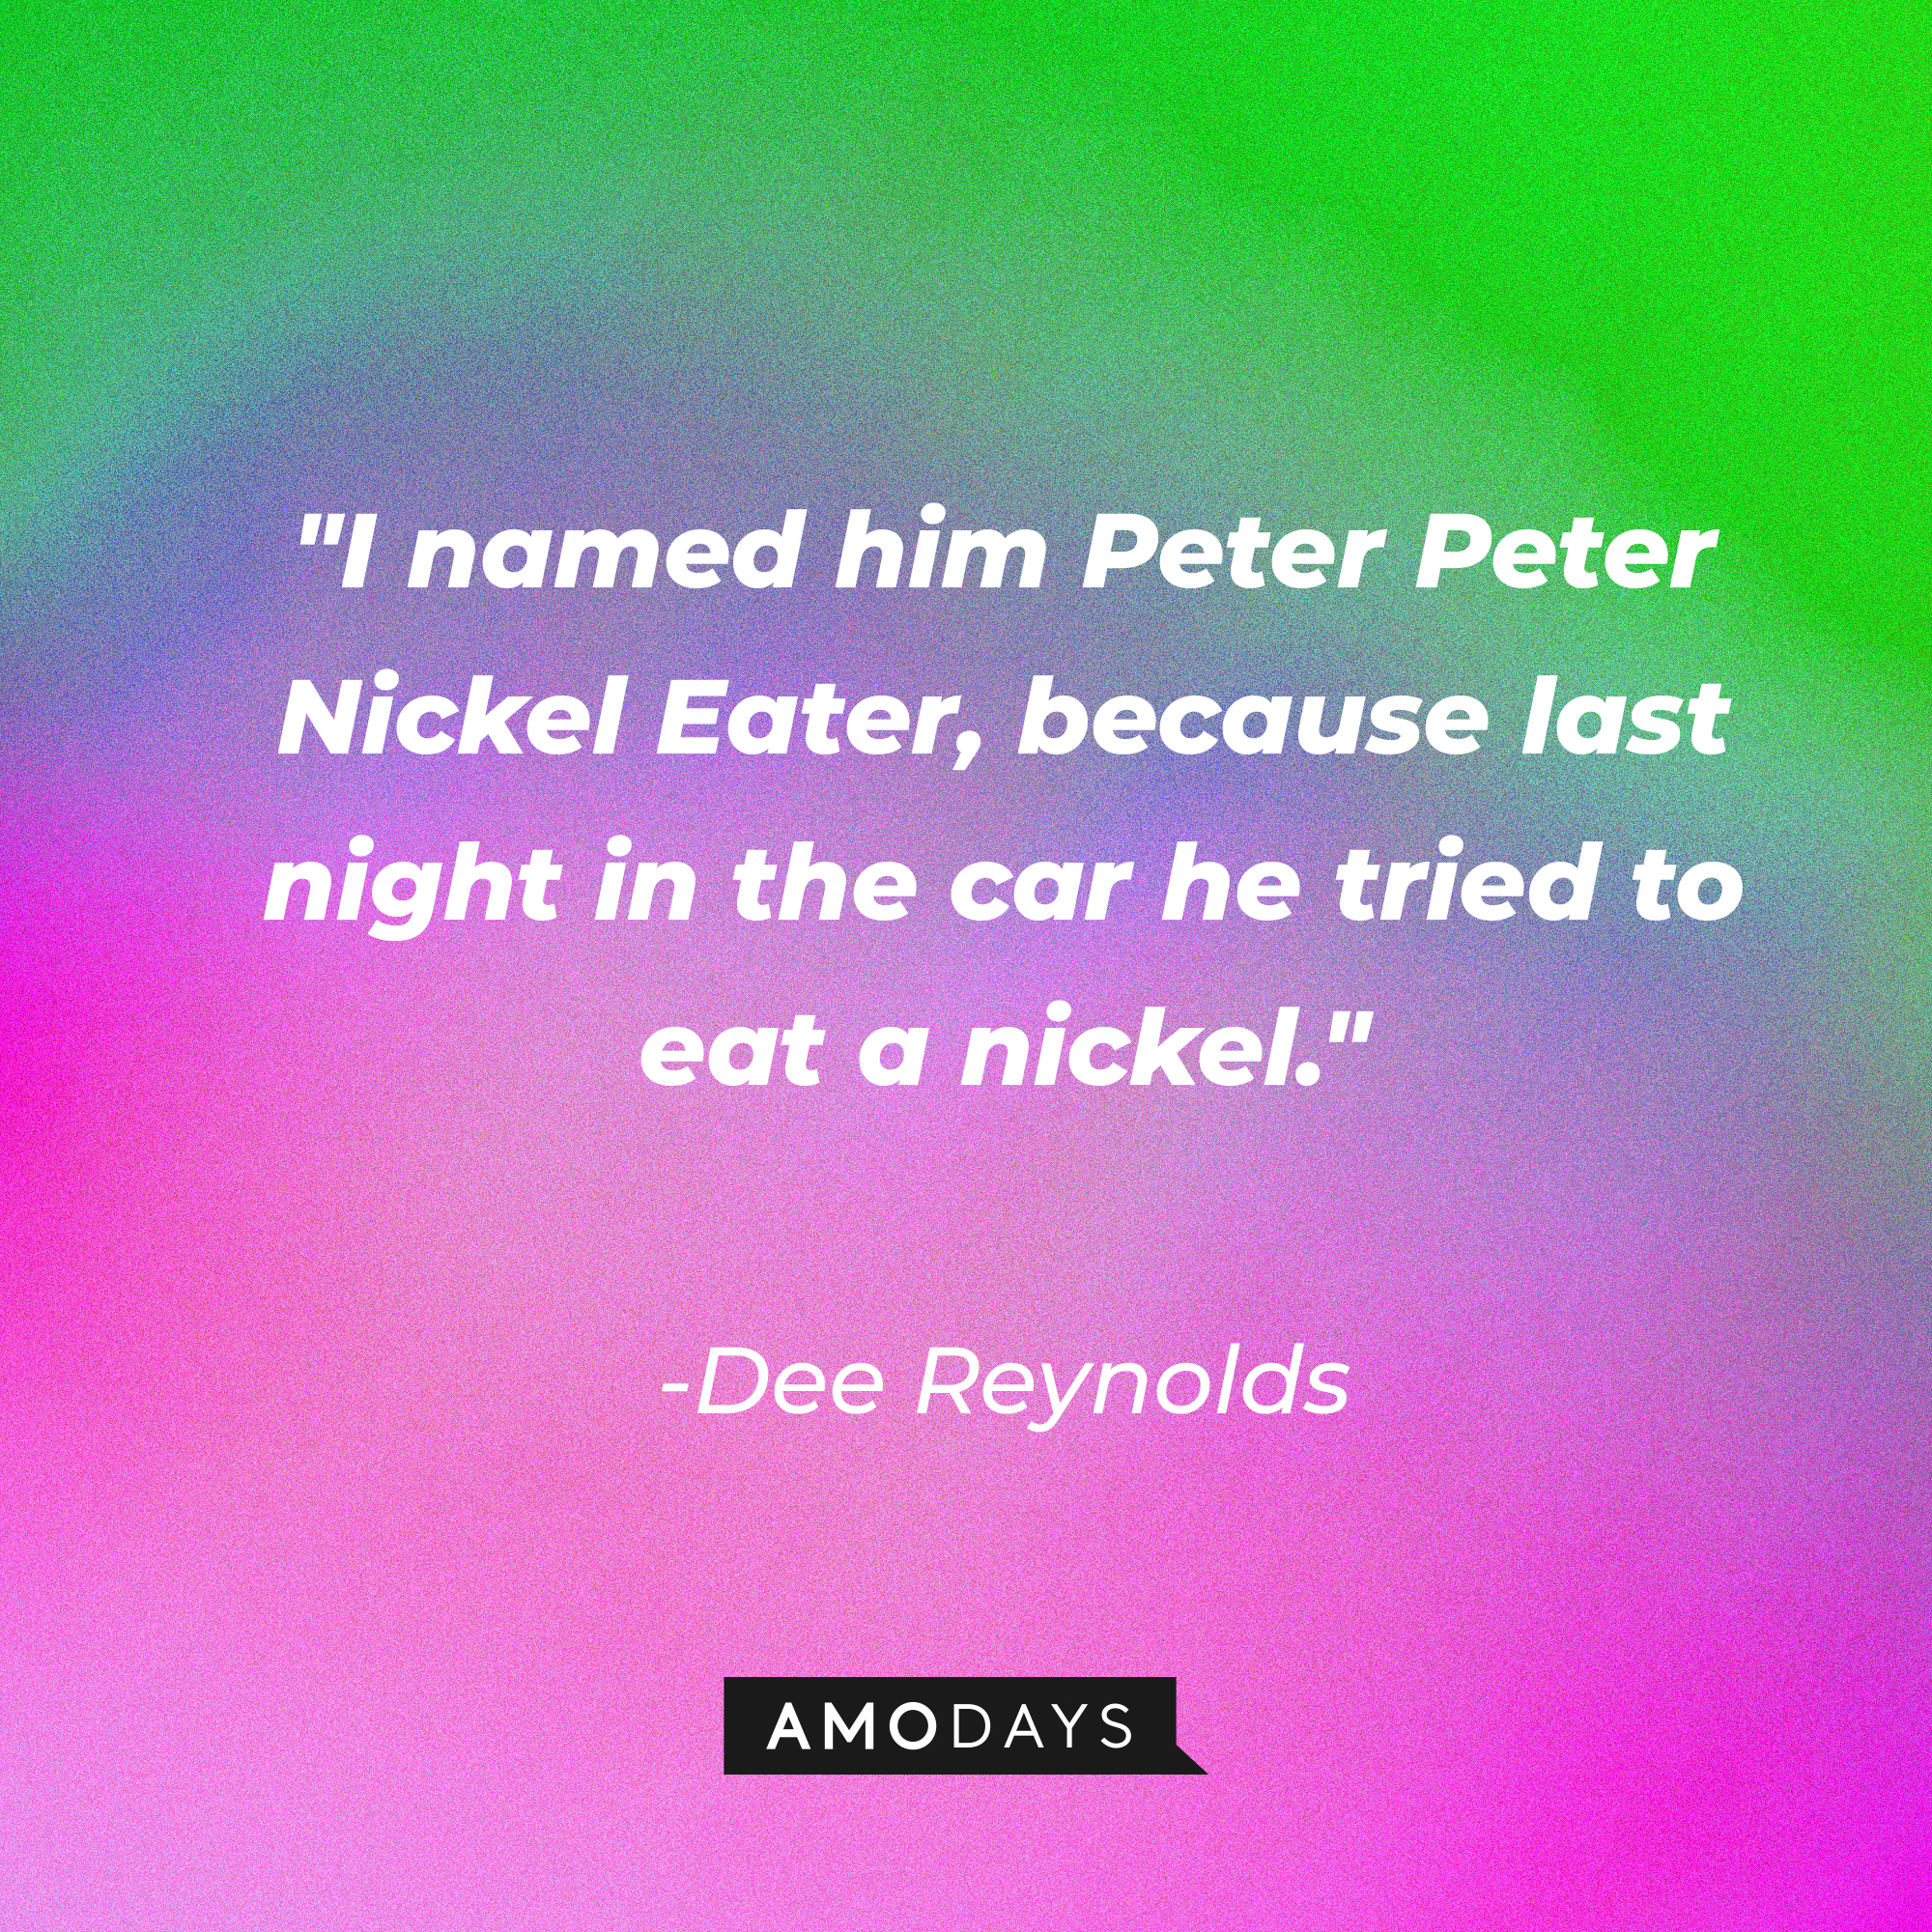 A photo with the quote, "I named him Peter Peter Nickel Eater, because last night in the car he tried to eat a nickel." | Source: Amodays